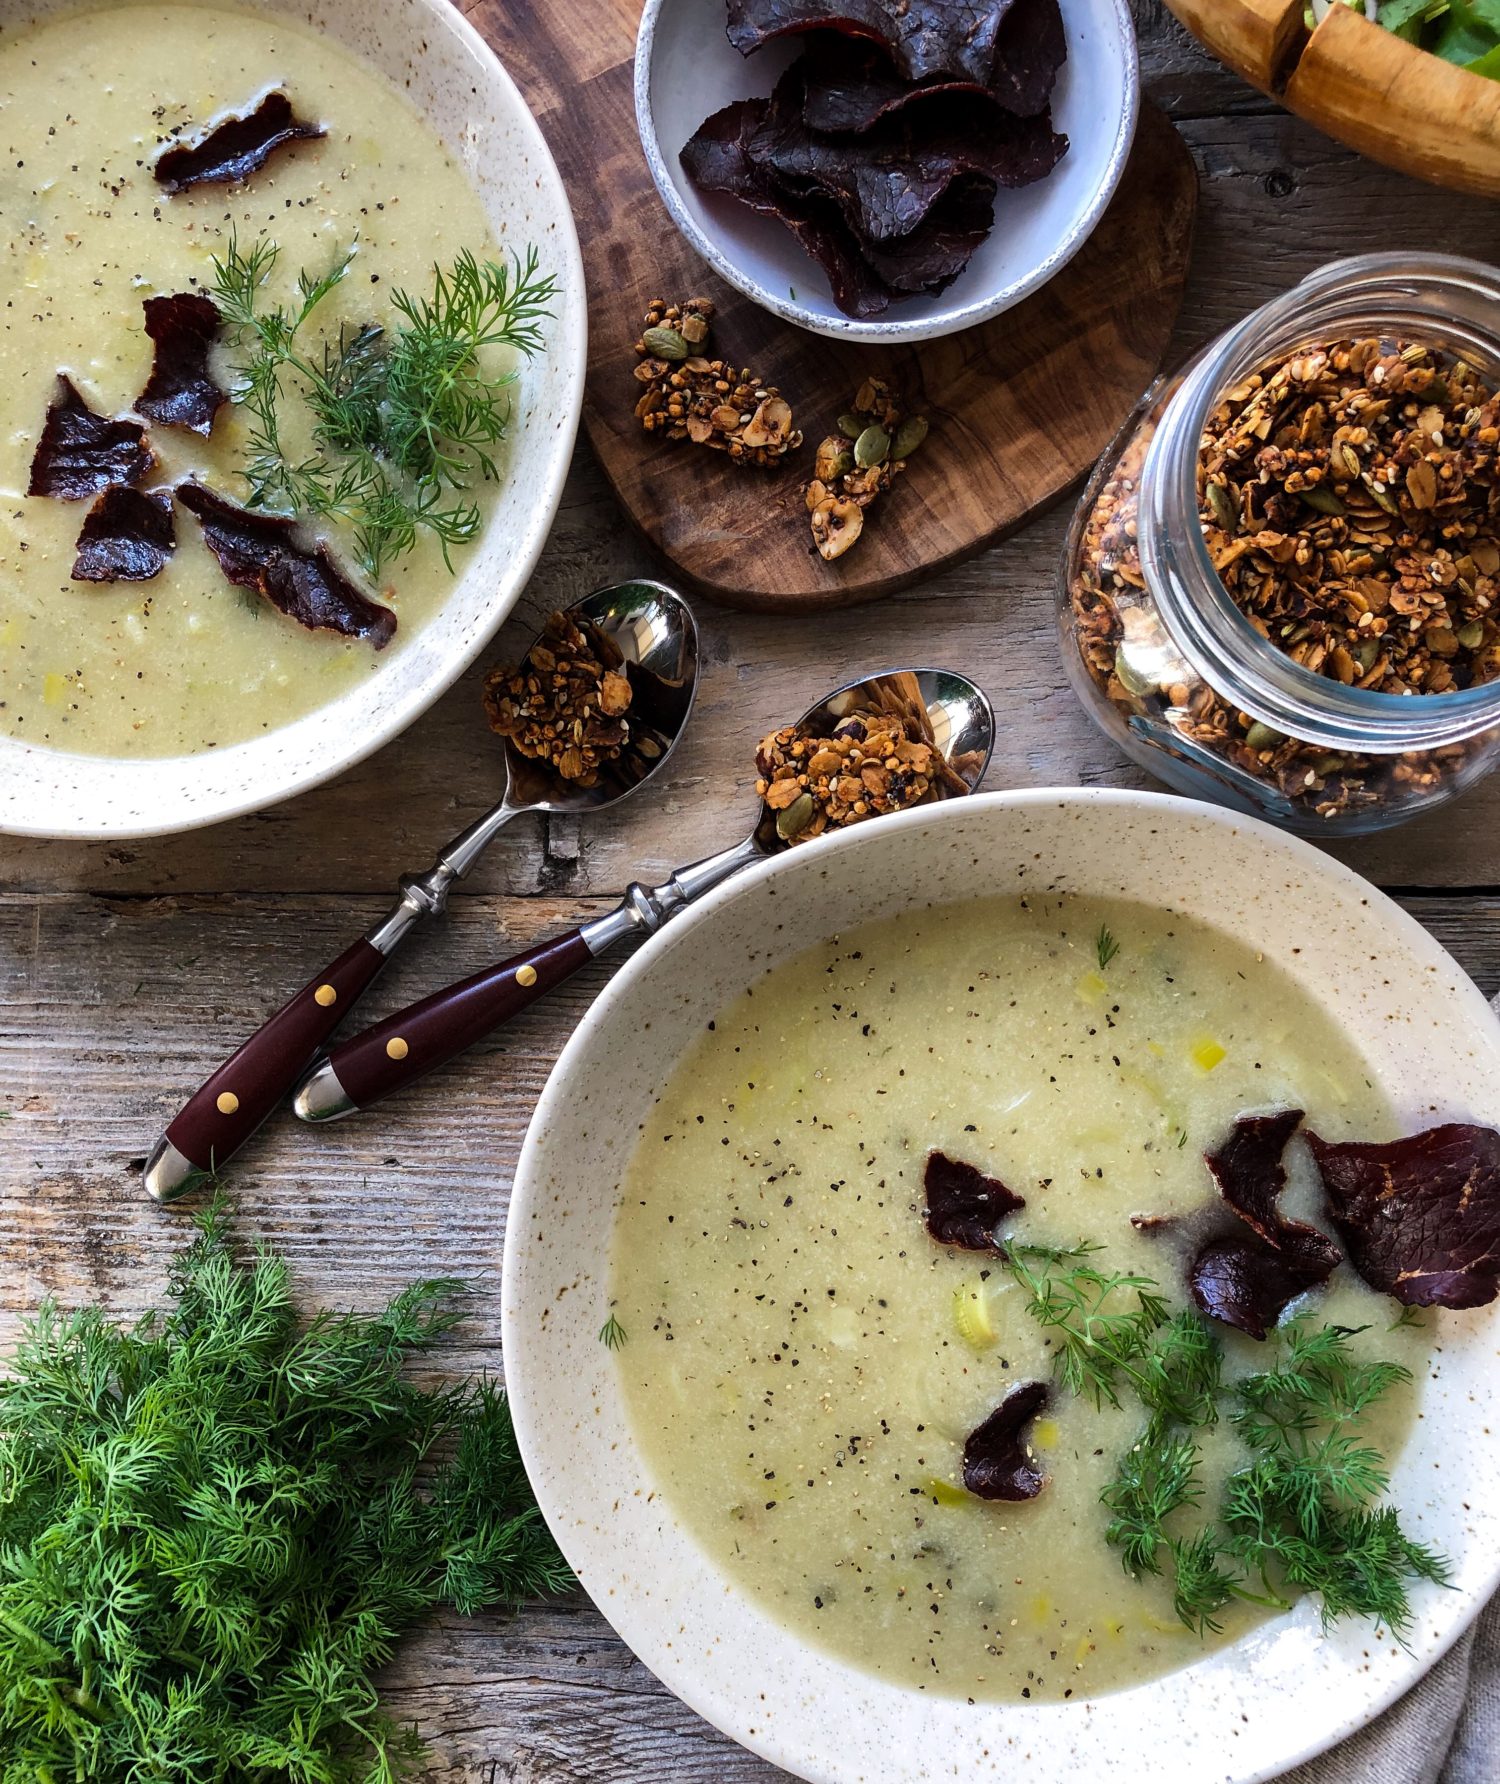 Roasted Potato and Leek Soup, with prosciutto chips and savoury granola